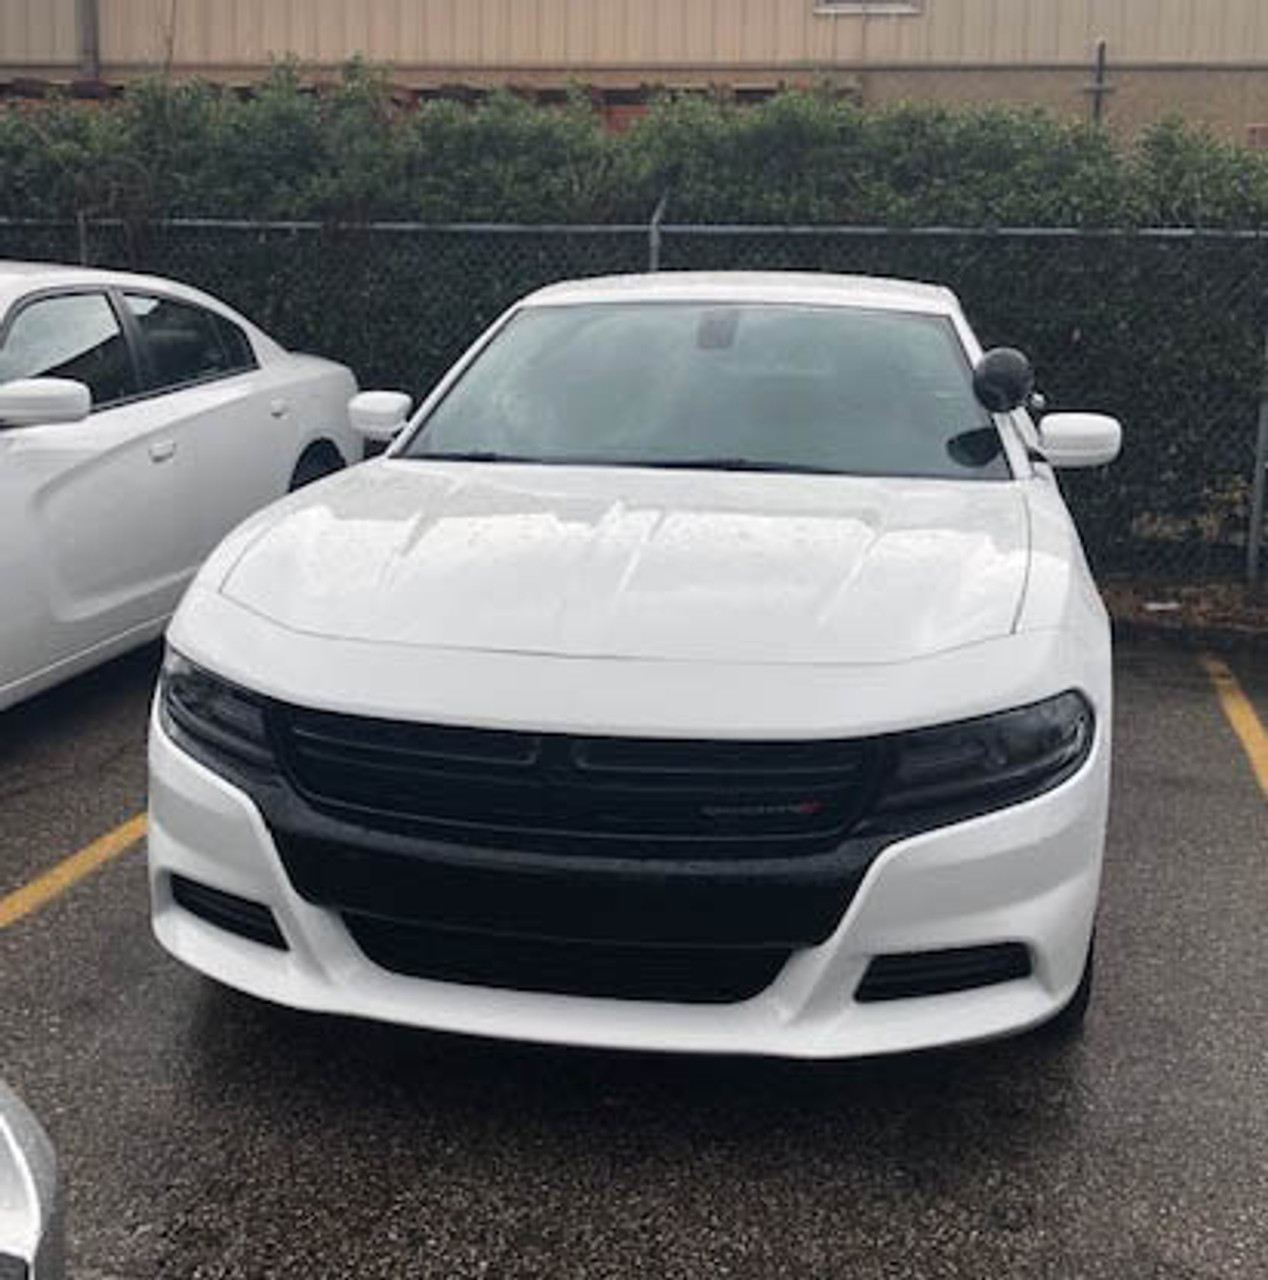 New 2023 White Dodge Charger PPV V8 RWD ready to be built as a Marked Patrol Package Police Pursuit Car (Emergency Lighting, Siren, Controller, Partition, Window Bars, etc.), WCM4, + Delivery